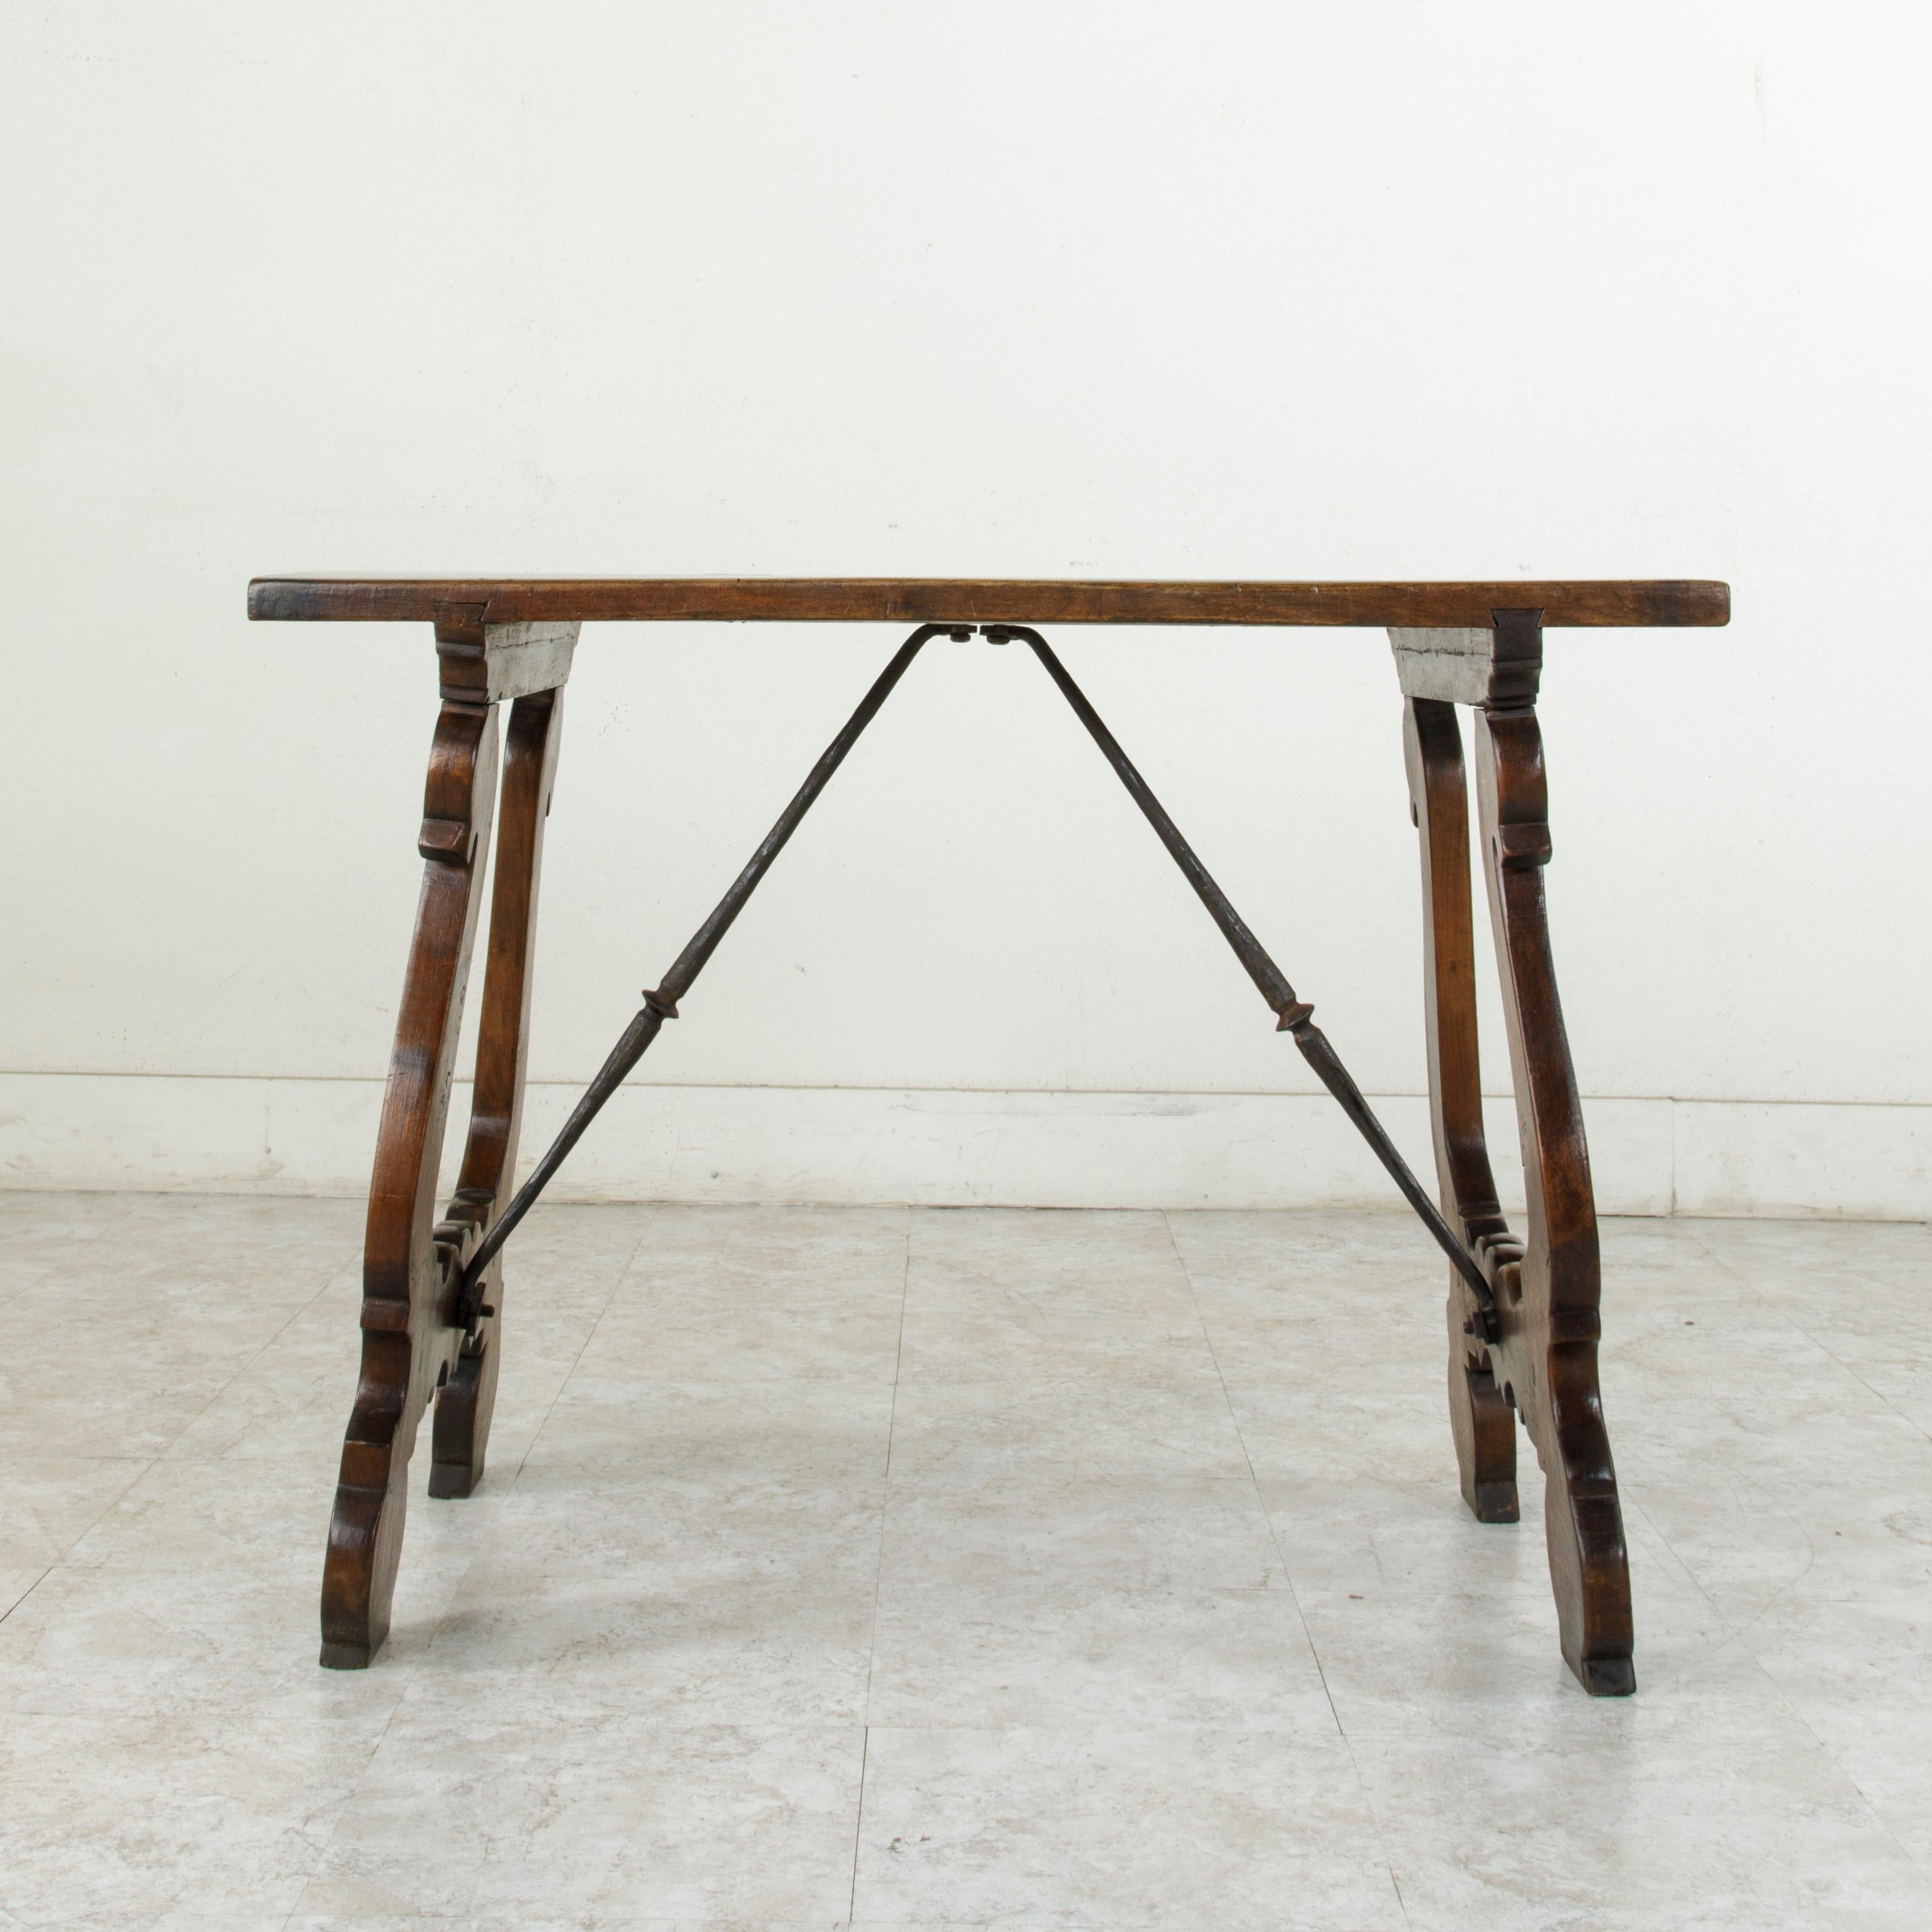 Forged 19th Century Spanish Renaissance Style Walnut Console Writing Table with Iron